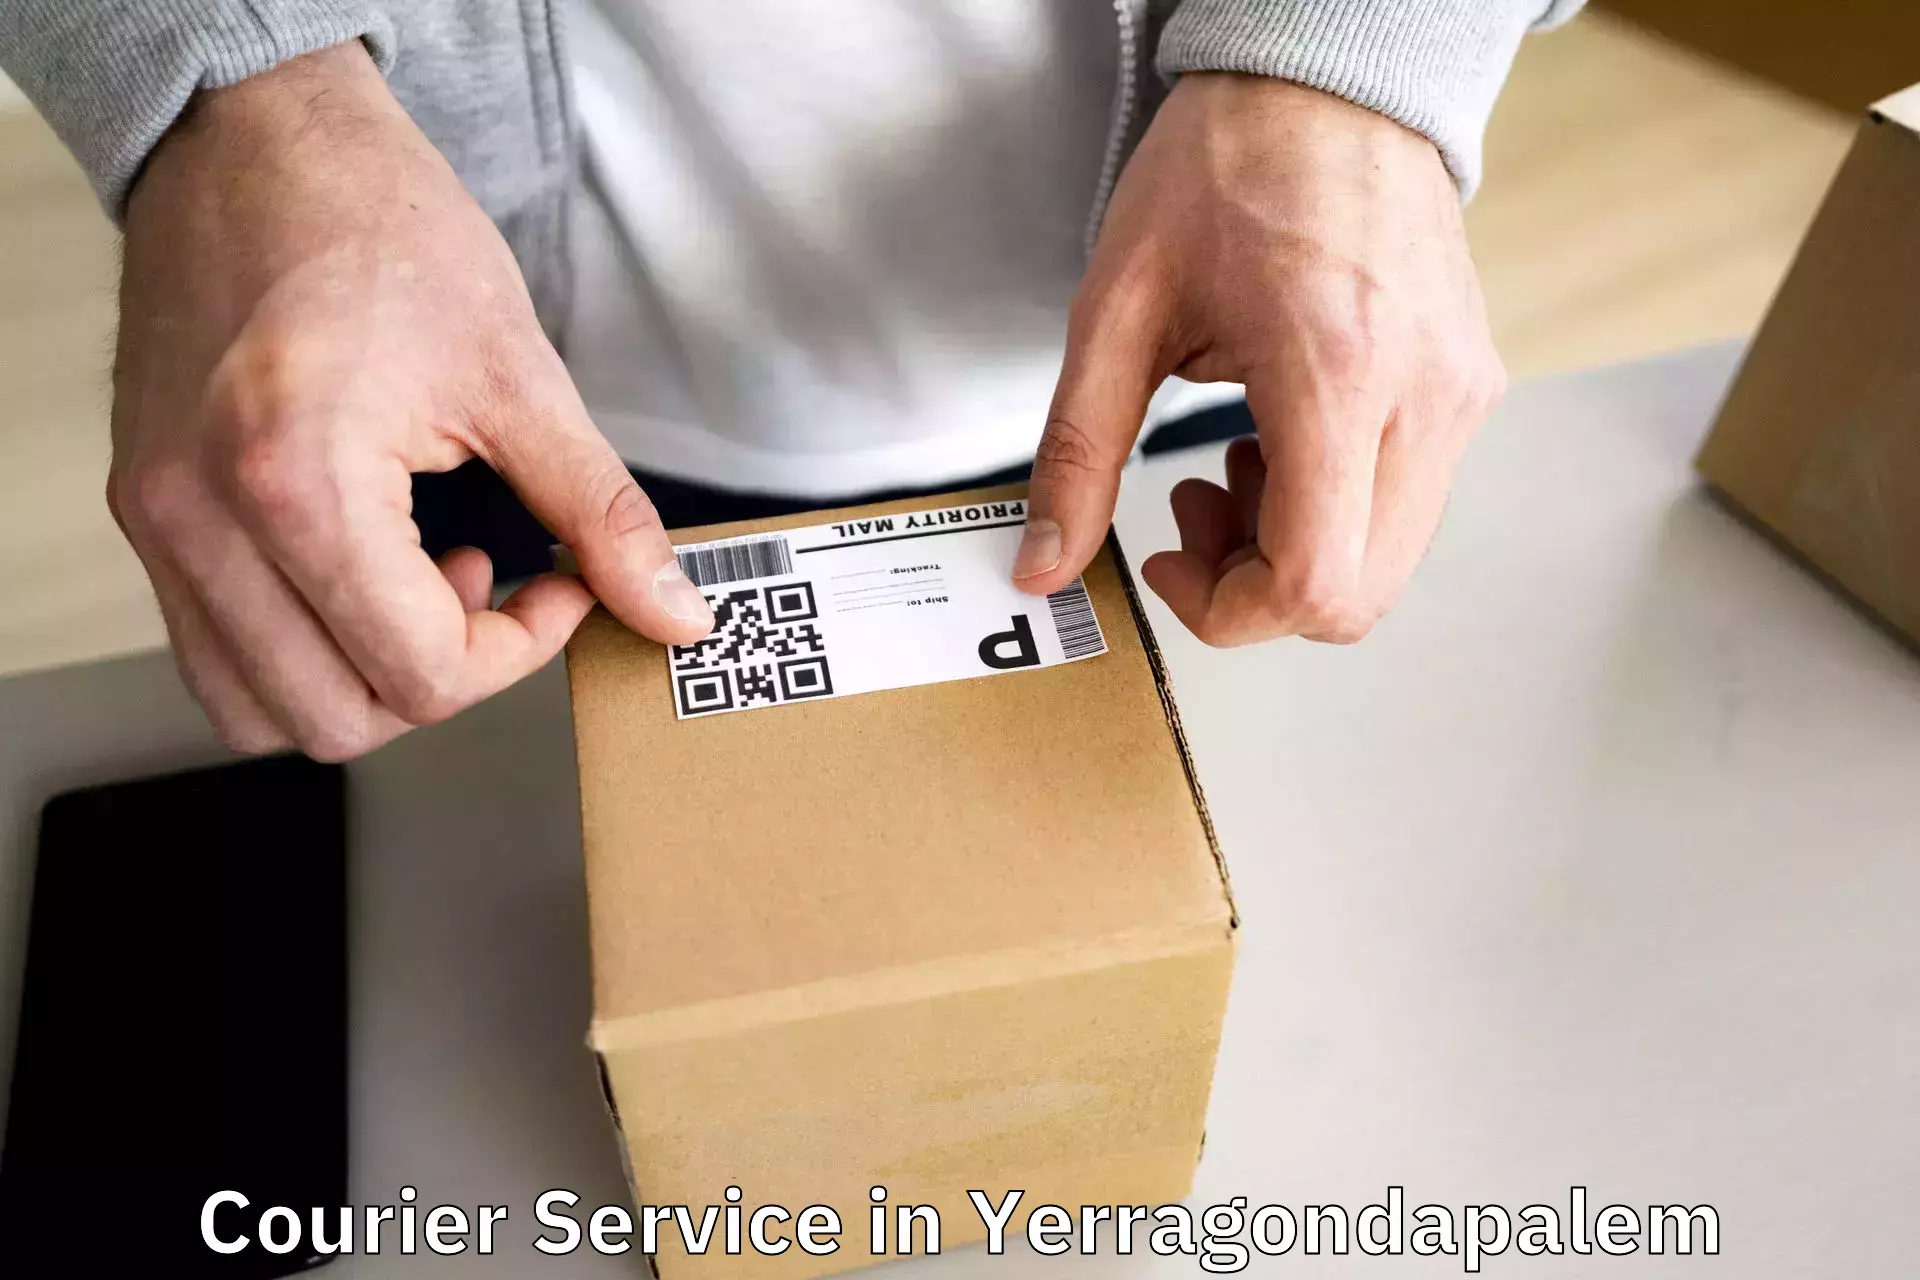 Competitive shipping rates in Yerragondapalem